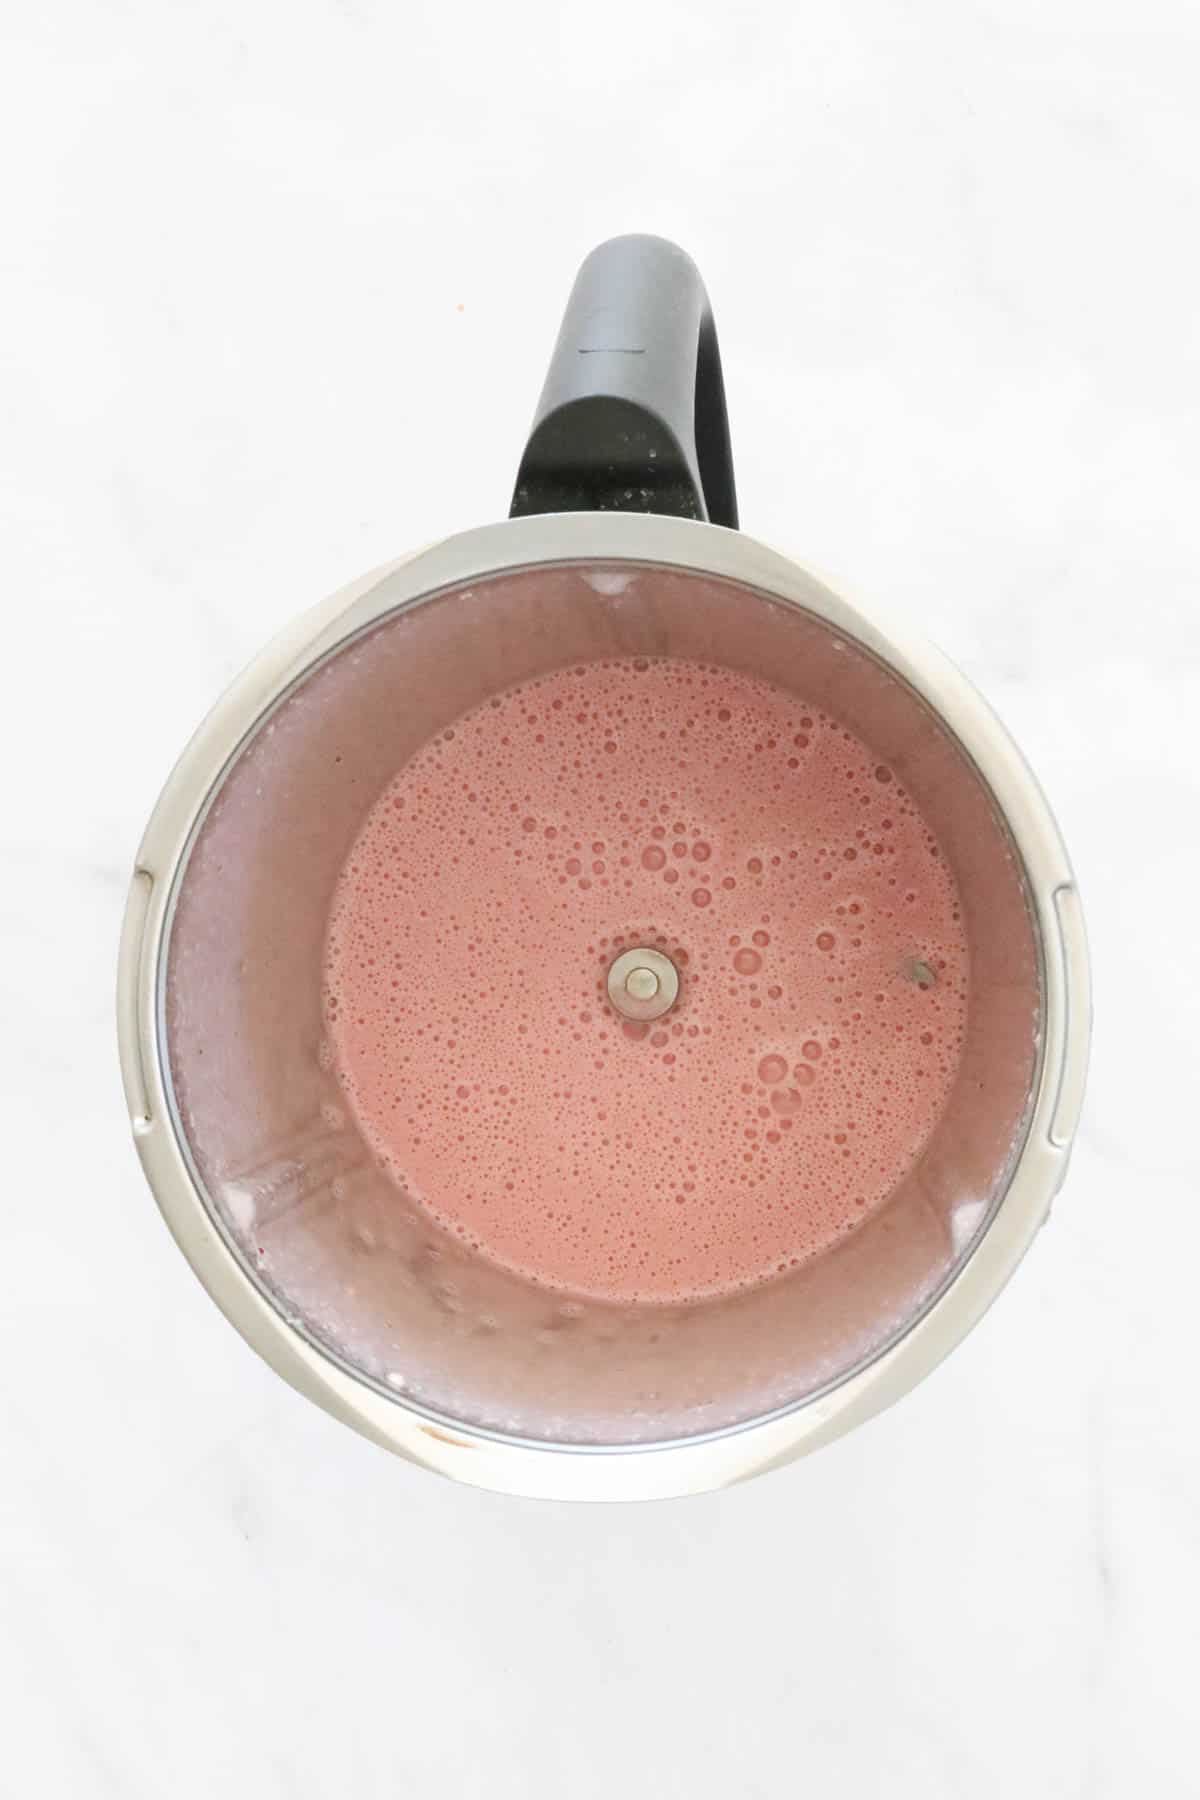 A strawberry smoothie in a Thermomix.